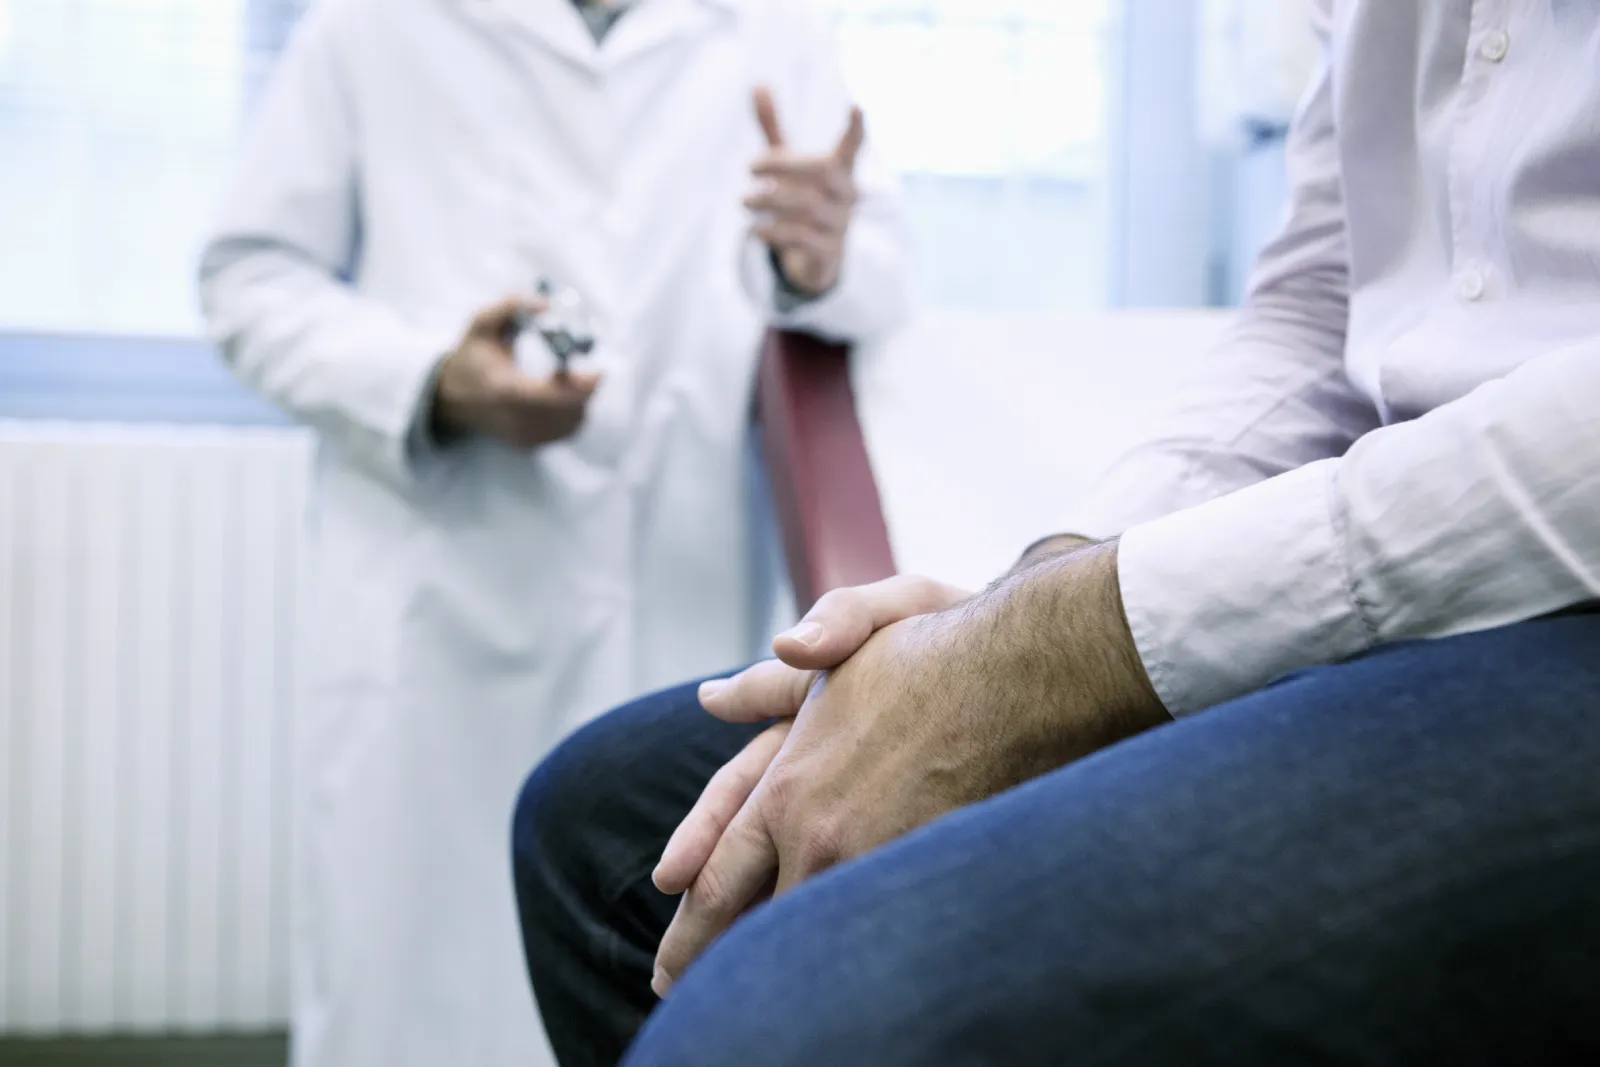 A physician consults with a patient in an exam room.